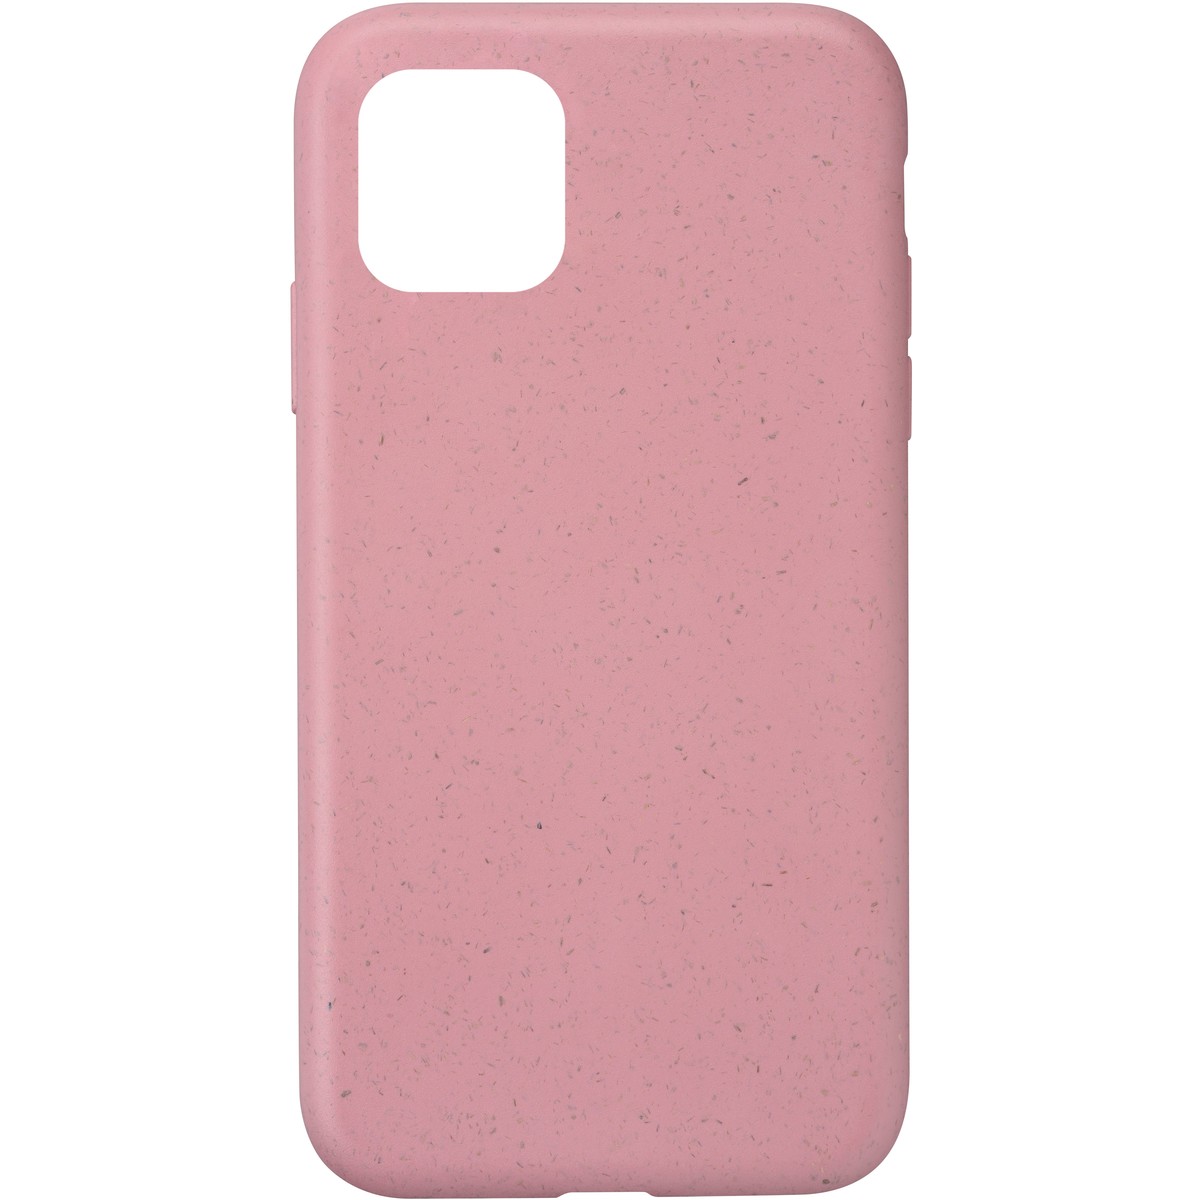 iPhone 12 Mini, case become, pink